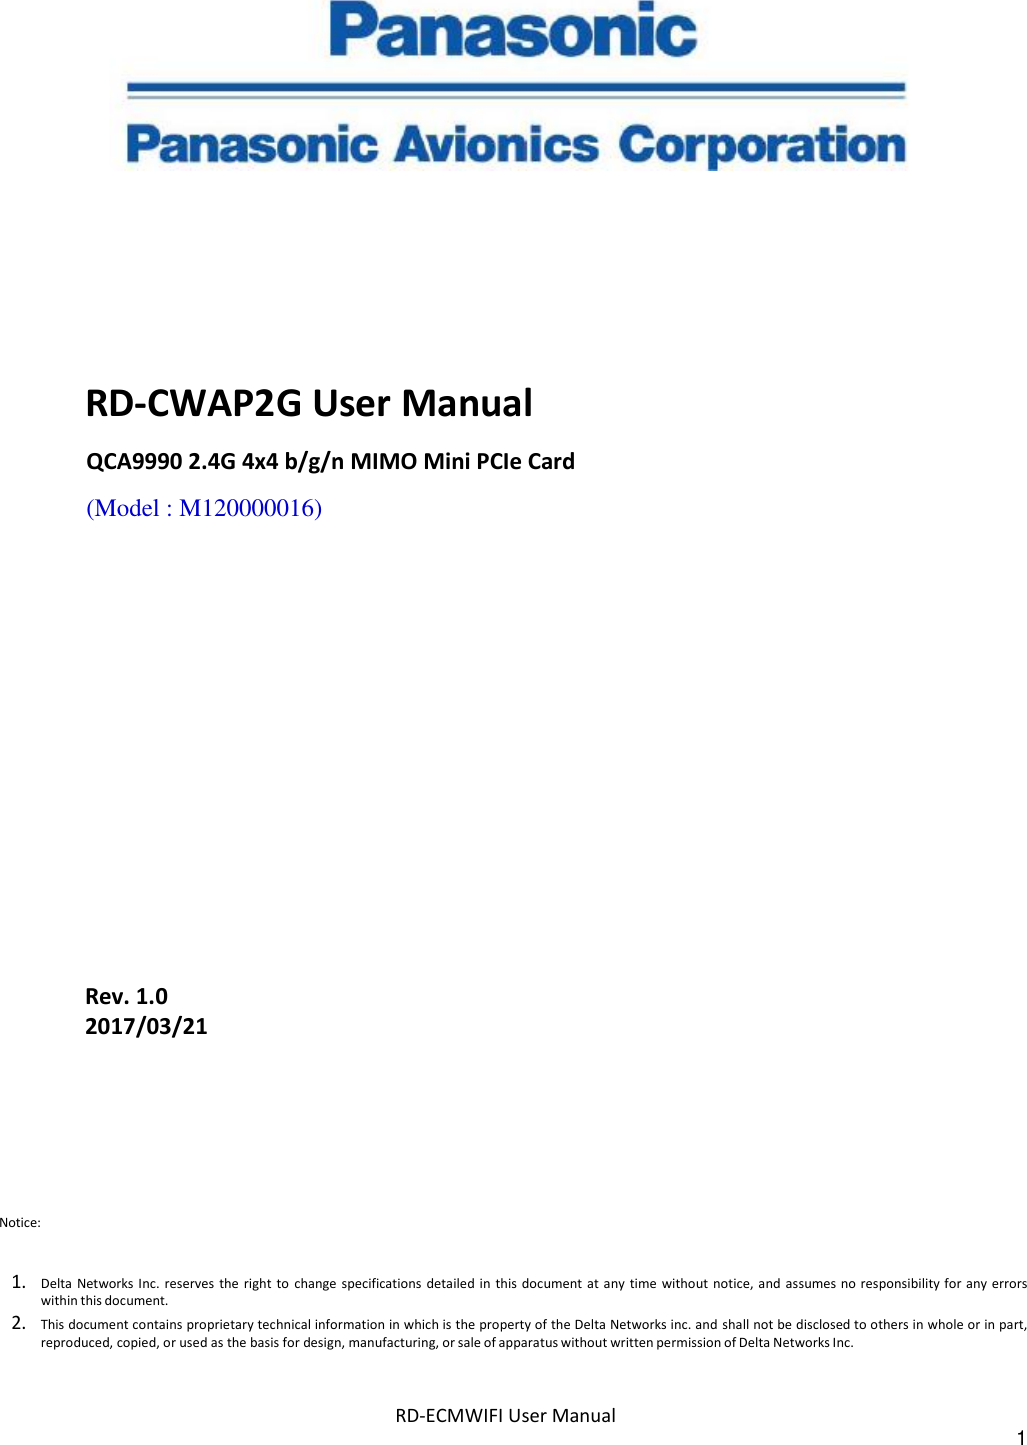 RD-ECMWIFI User Manual 1          RD-CWAP2G User Manual QCA9990 2.4G 4x4 b/g/n MIMO Mini PCIe Card (Model : M120000016)                Rev. 1.0 2017/03/21 Notice:   1. Delta  Networks Inc. reserves  the  right  to  change specifications  detailed  in  this document  at any time  without  notice,  and assumes  no responsibility for any errors within this document. 2. This document contains proprietary technical information in which is the property of the Delta Networks inc. and shall not be disclosed to others in whole or in part, reproduced, copied, or used as the basis for design, manufacturing, or sale of apparatus without written permission of Delta Networks Inc. 